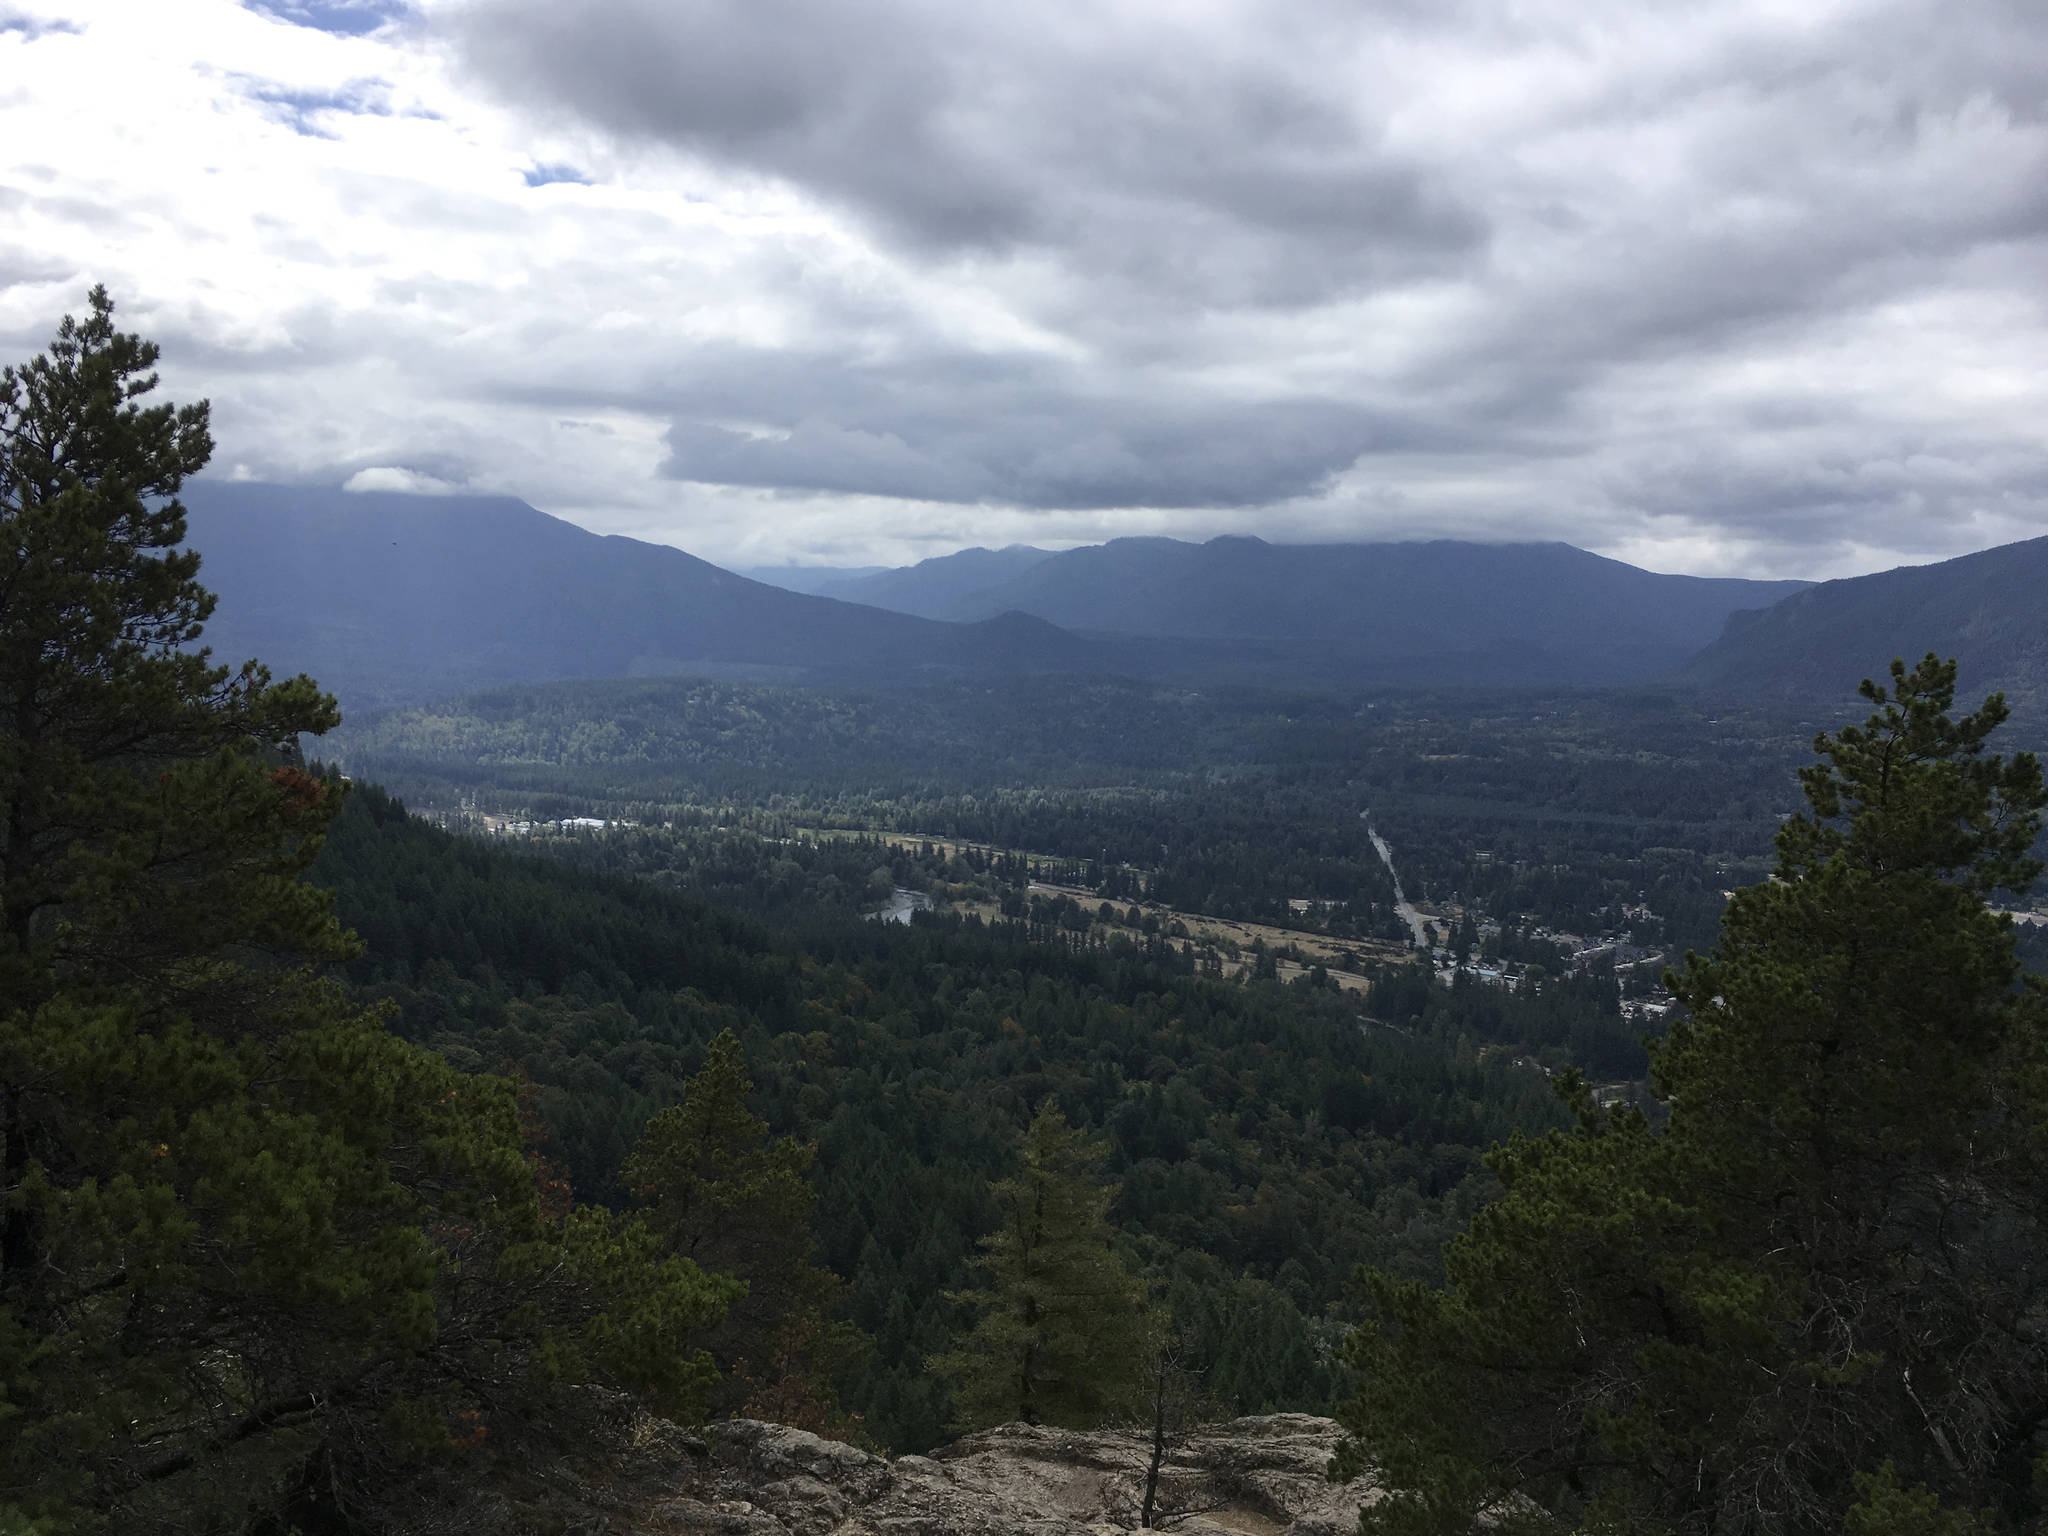 The view from the Little Si hiking trail summit in North Bend. Photo courtesy of James Martin